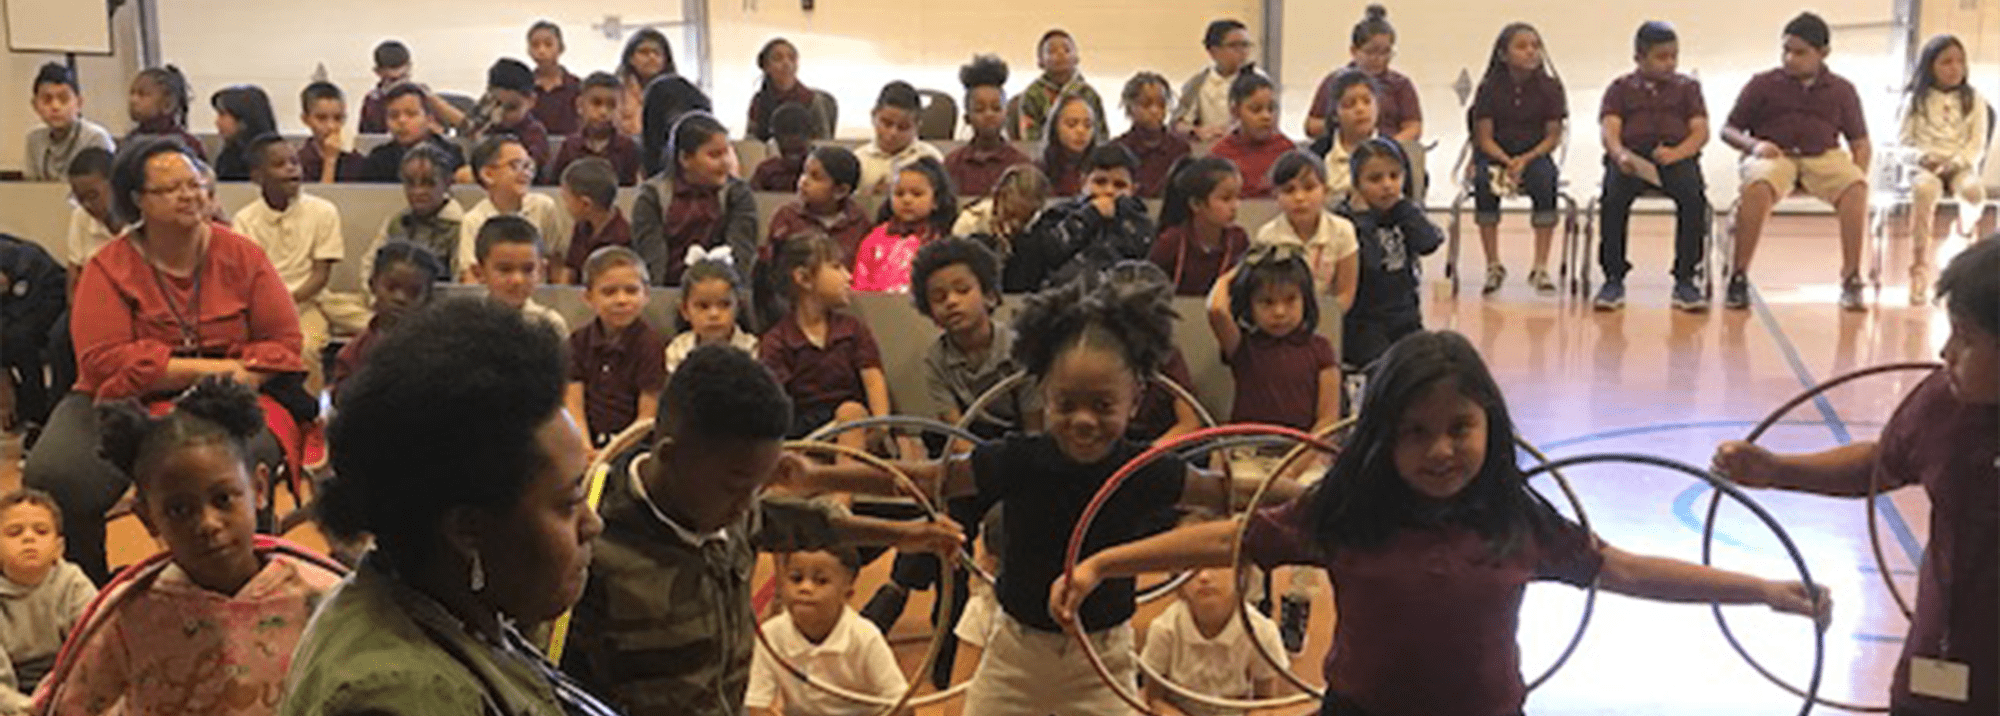 Group of students participating in a hula hoop activity